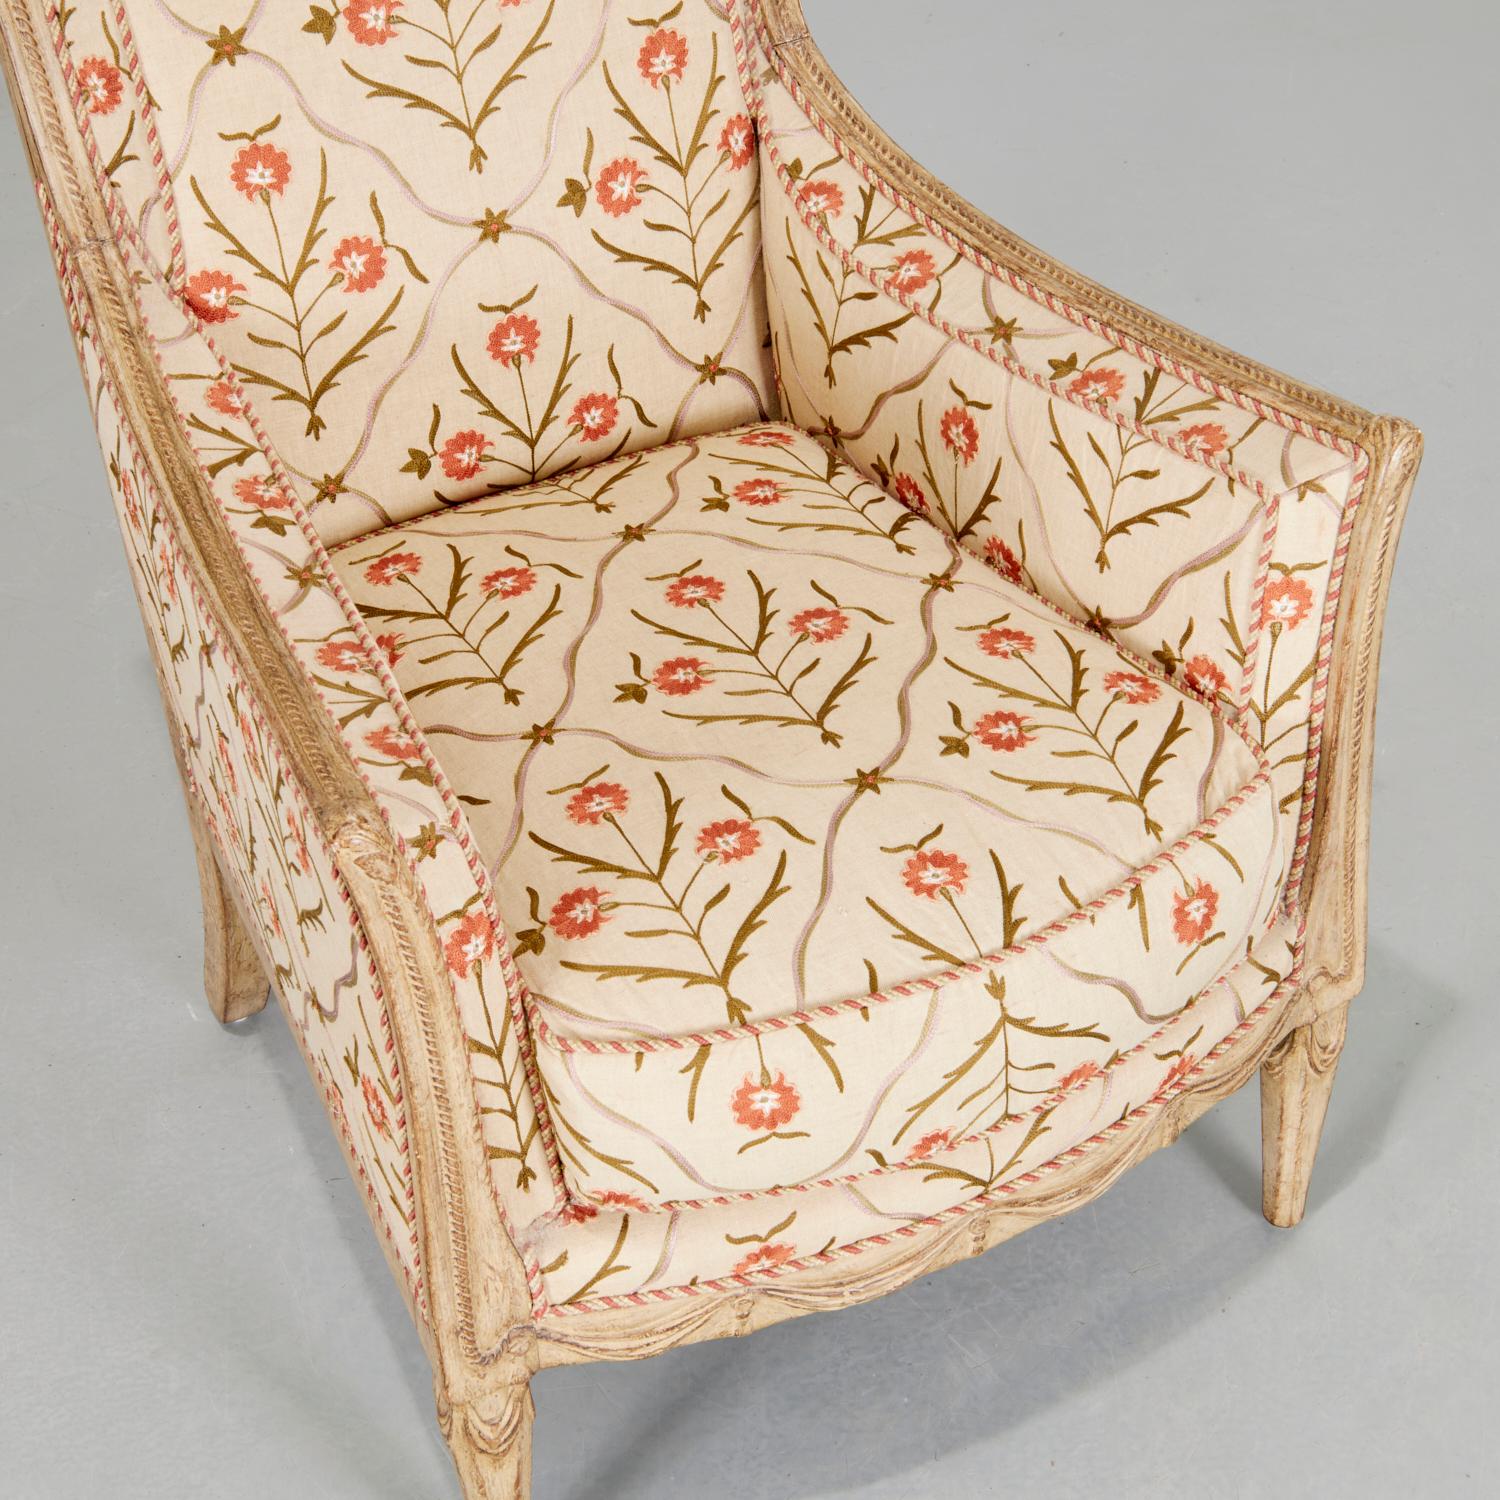 Mid 20th C. Directoire style crewelwork bergere with a cream painted wood frame decorated with bands of carved rope and draped swags. The crewelwork upholstery is accented with a complementary silk rope trim, while the back of the chair is